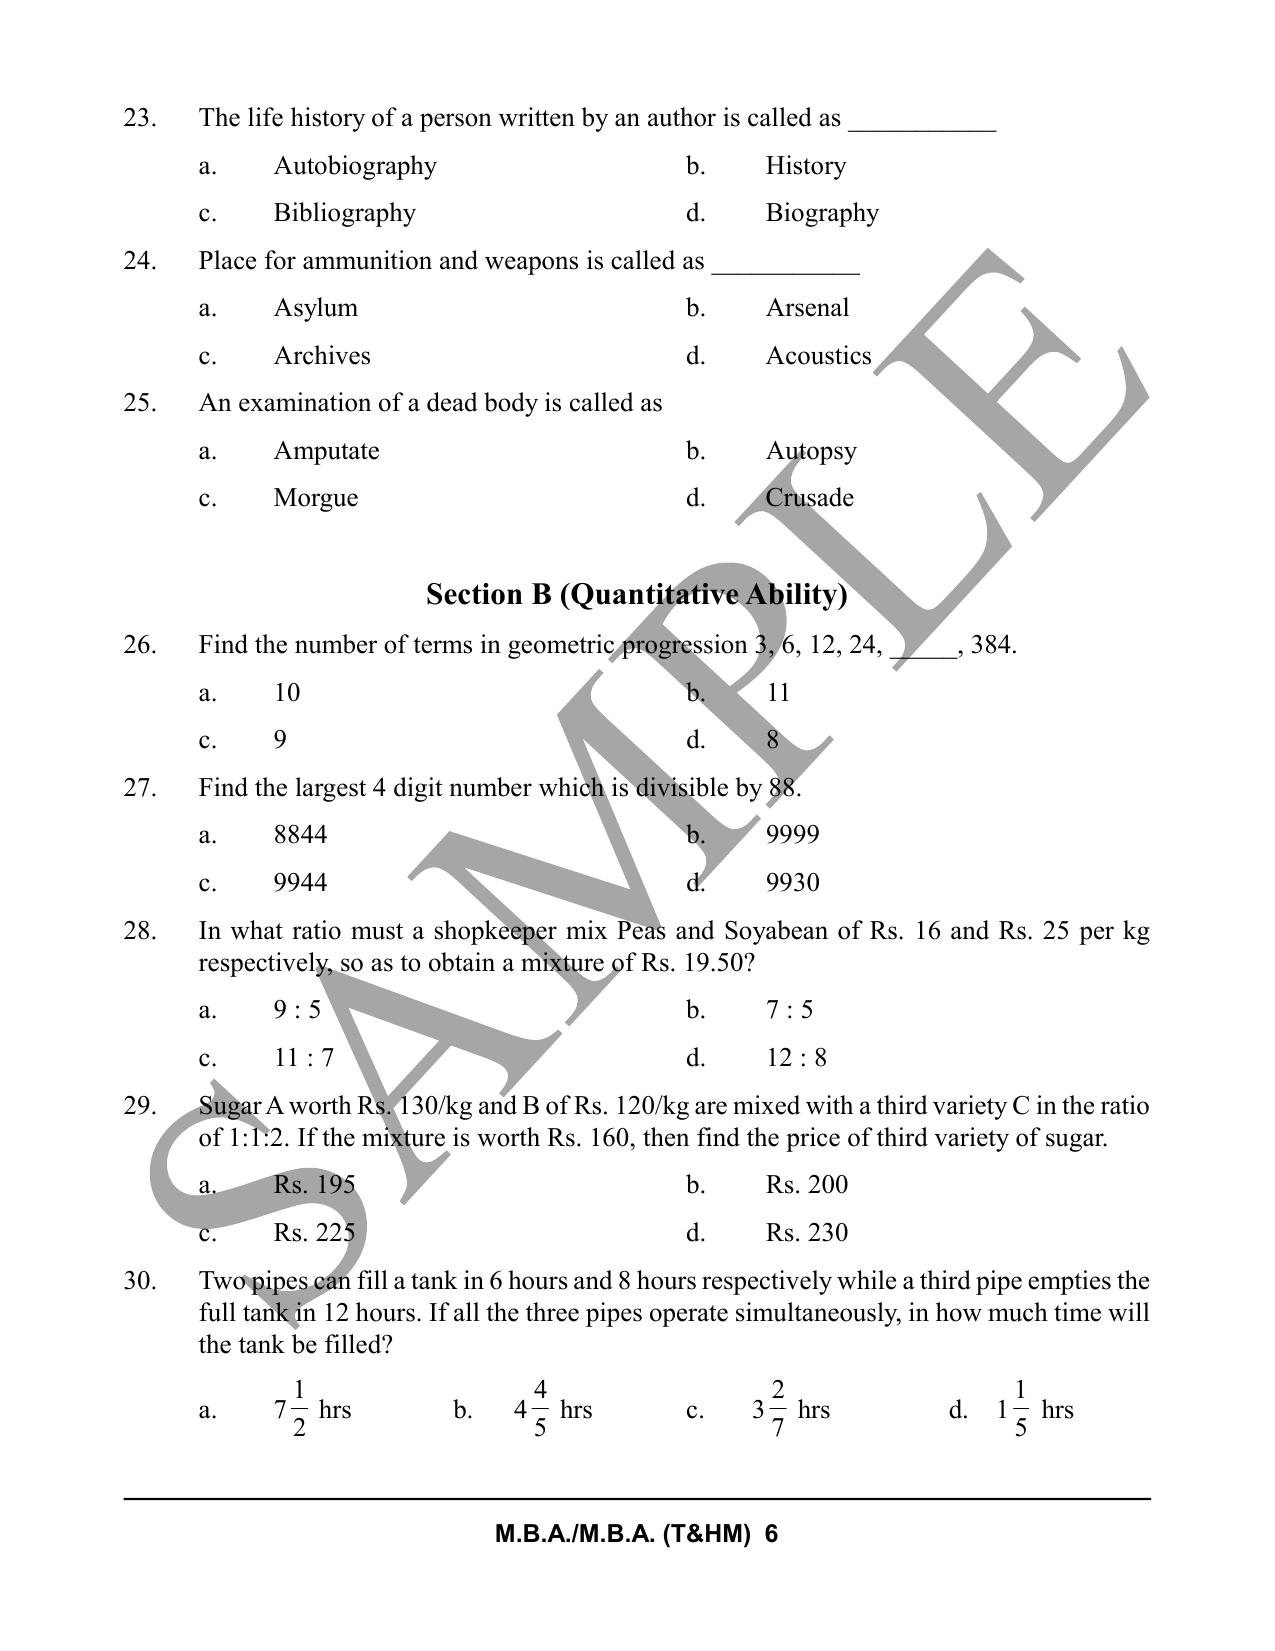 HPCET MBA and MBA (T&HM) Sample Paper 2023 Sample Paper - Page 6